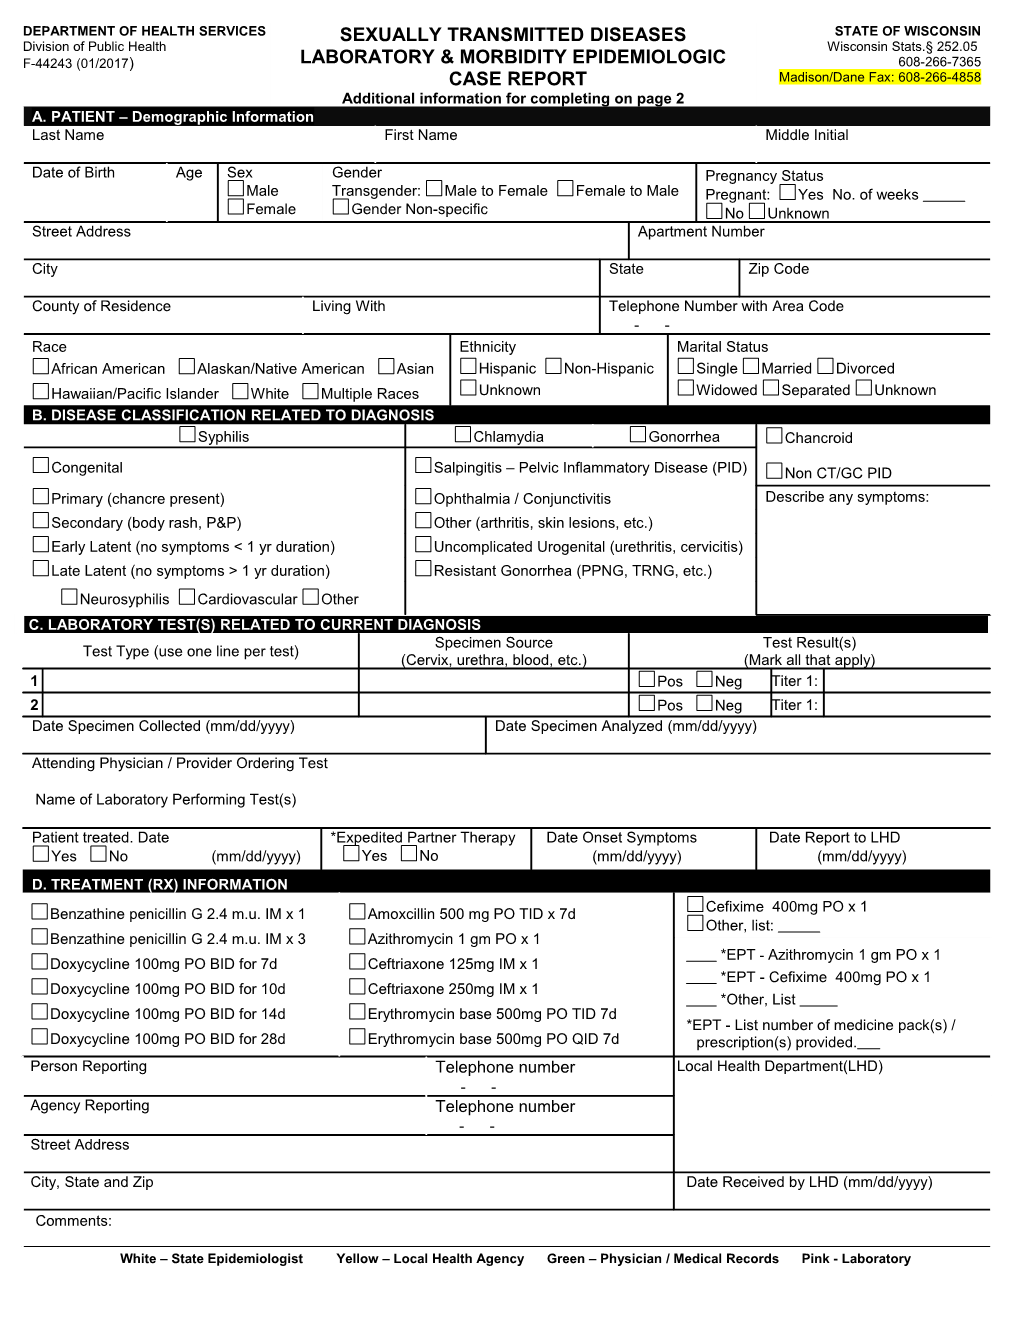 Sexually Transmitted Diseases Laboratory & Morbidity Epidemiologic Case Report, F-44243